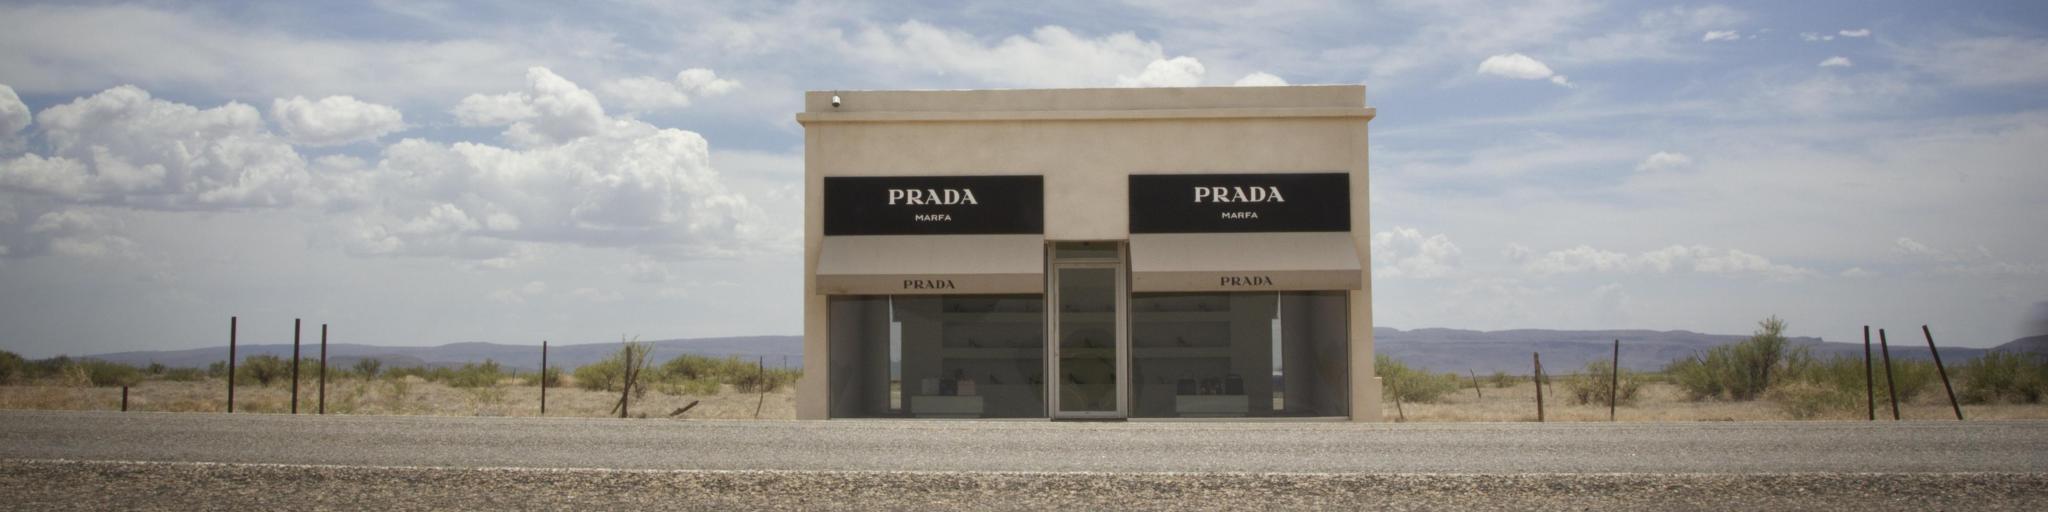  Prada store art installation near Marfa. Photo taken on a sunny day with a few clouds in the sky. The art installation building sits on the side of the highway.